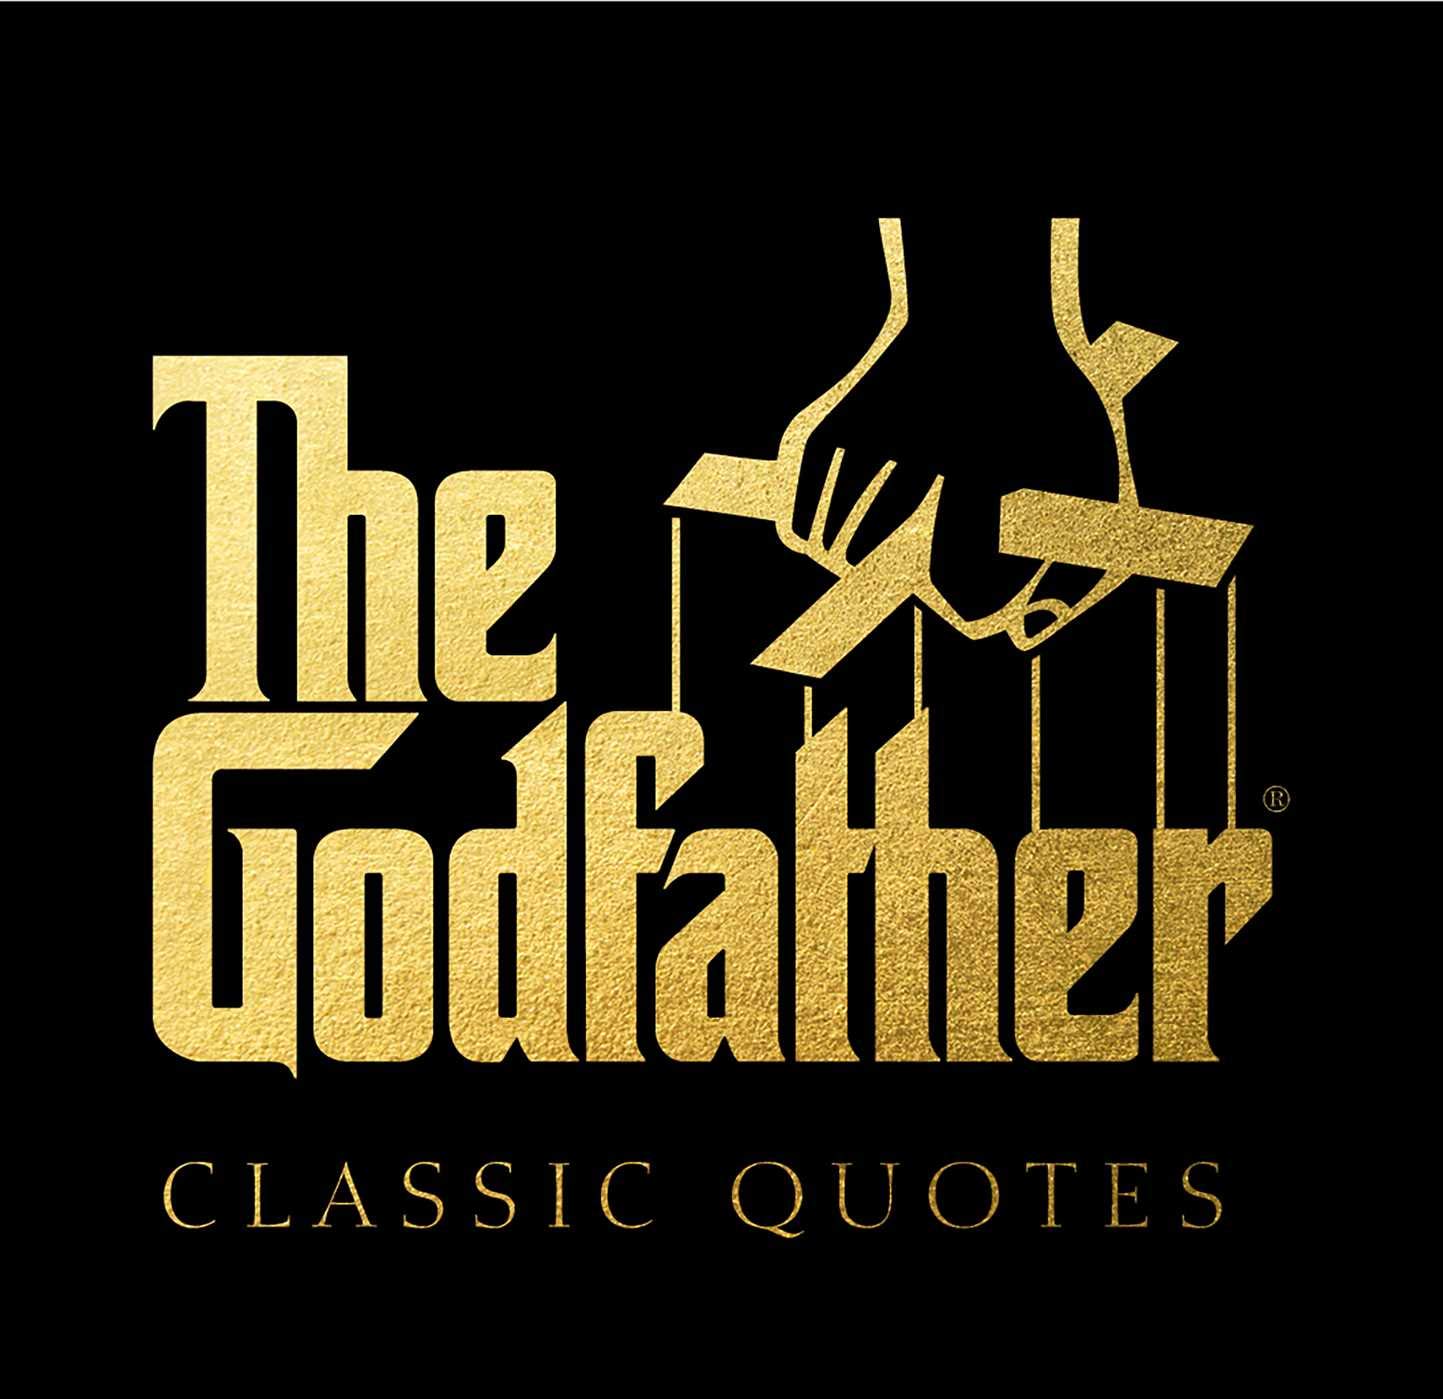 The Godfather Classic Quotes: A Classic Collection of Quotes from Francis Ford Coppola's, The Godfather  Illustrated - DeVito, Carlo